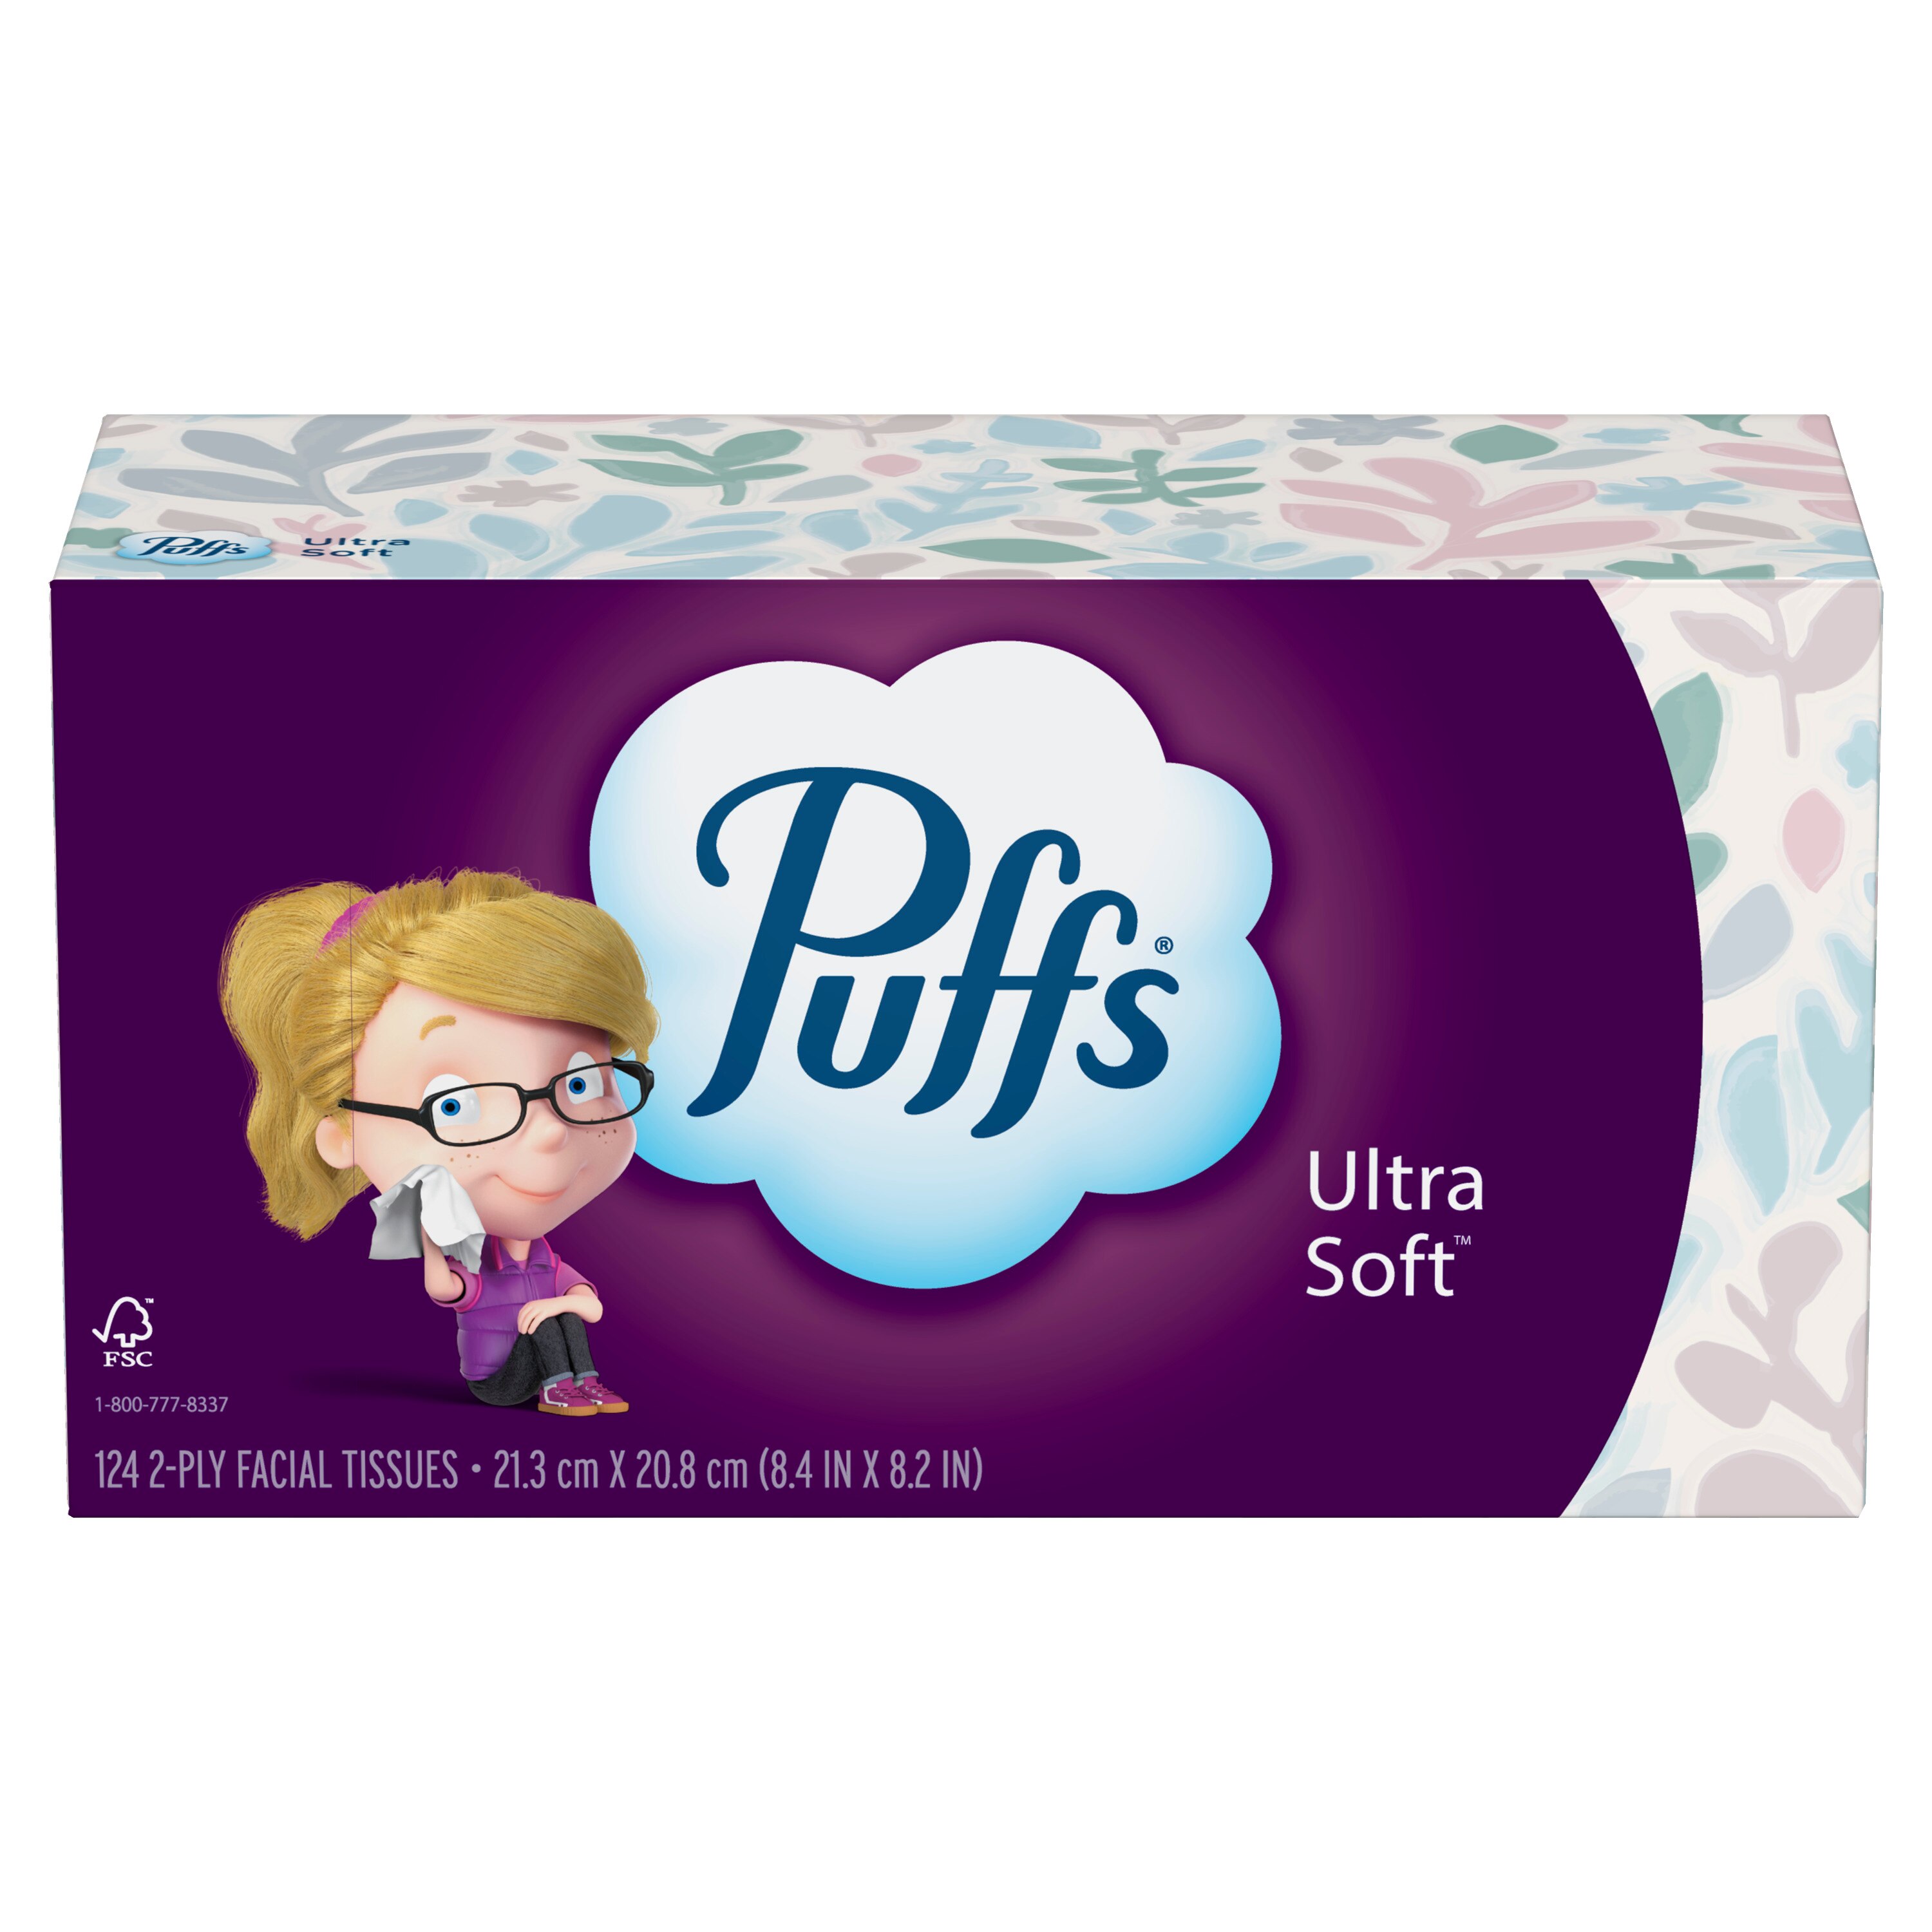 Puffs Ultra Soft Non-Lotion Facial Tissues, 1 Family Box, 124 CT